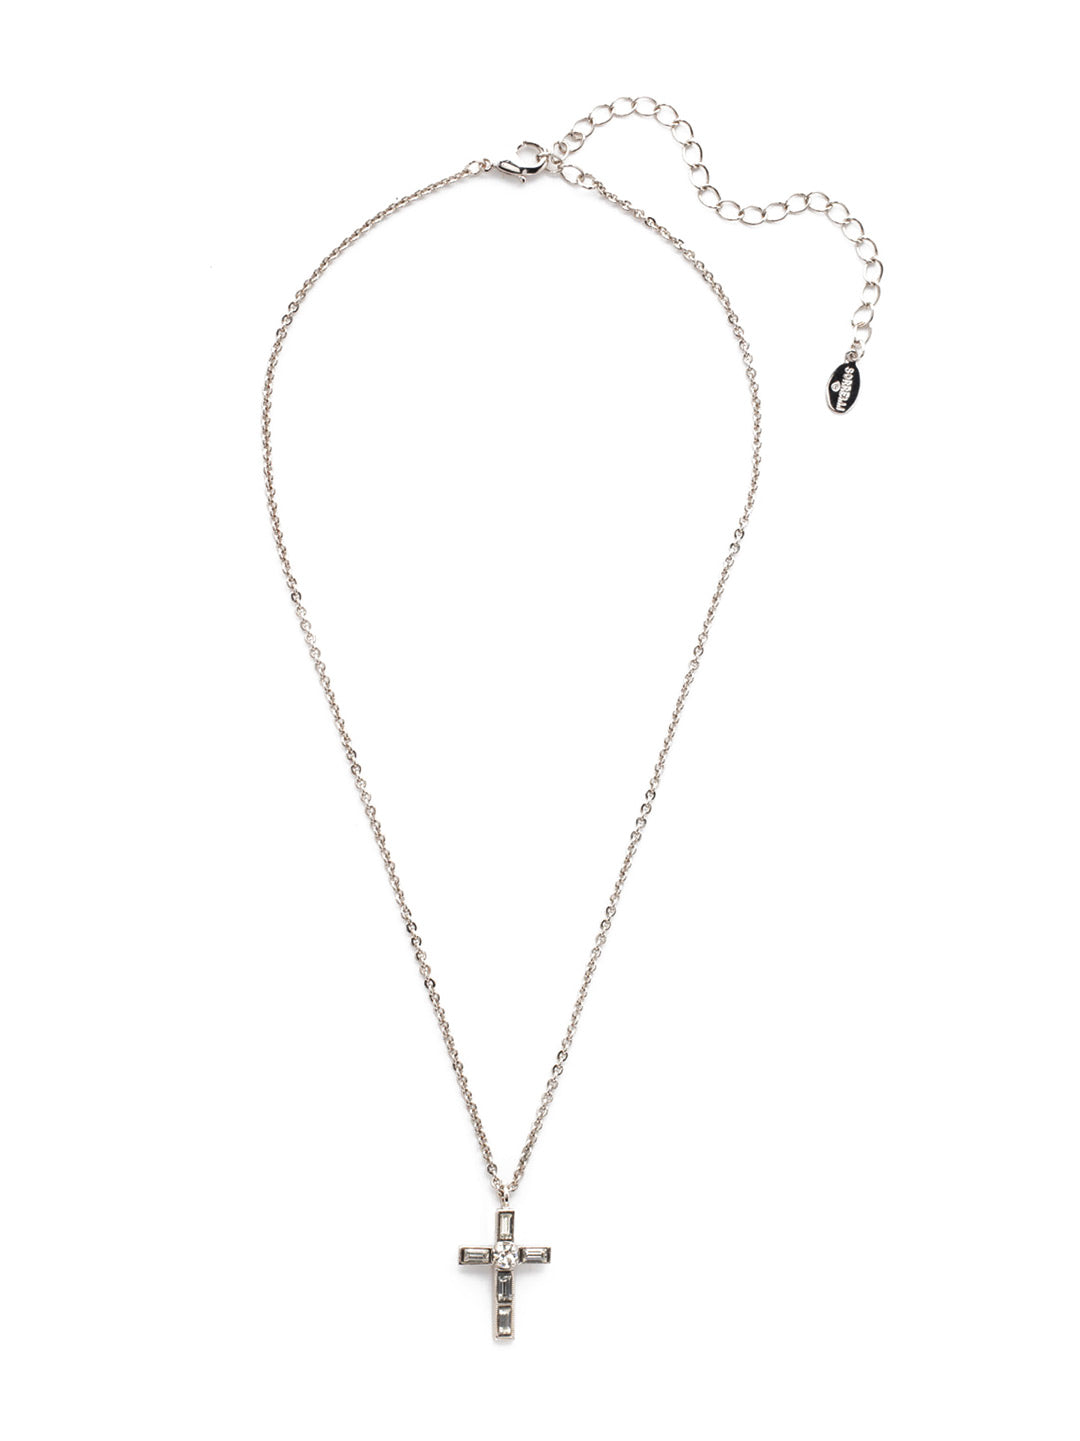 Teagan Cross Pendant Necklace - NEX6PDCRY - The Teagan Cross Pendant Necklace features a single crystal encrusted cross hanging from an adjustable chain. From Sorrelli's Crystal collection in our Palladium finish.